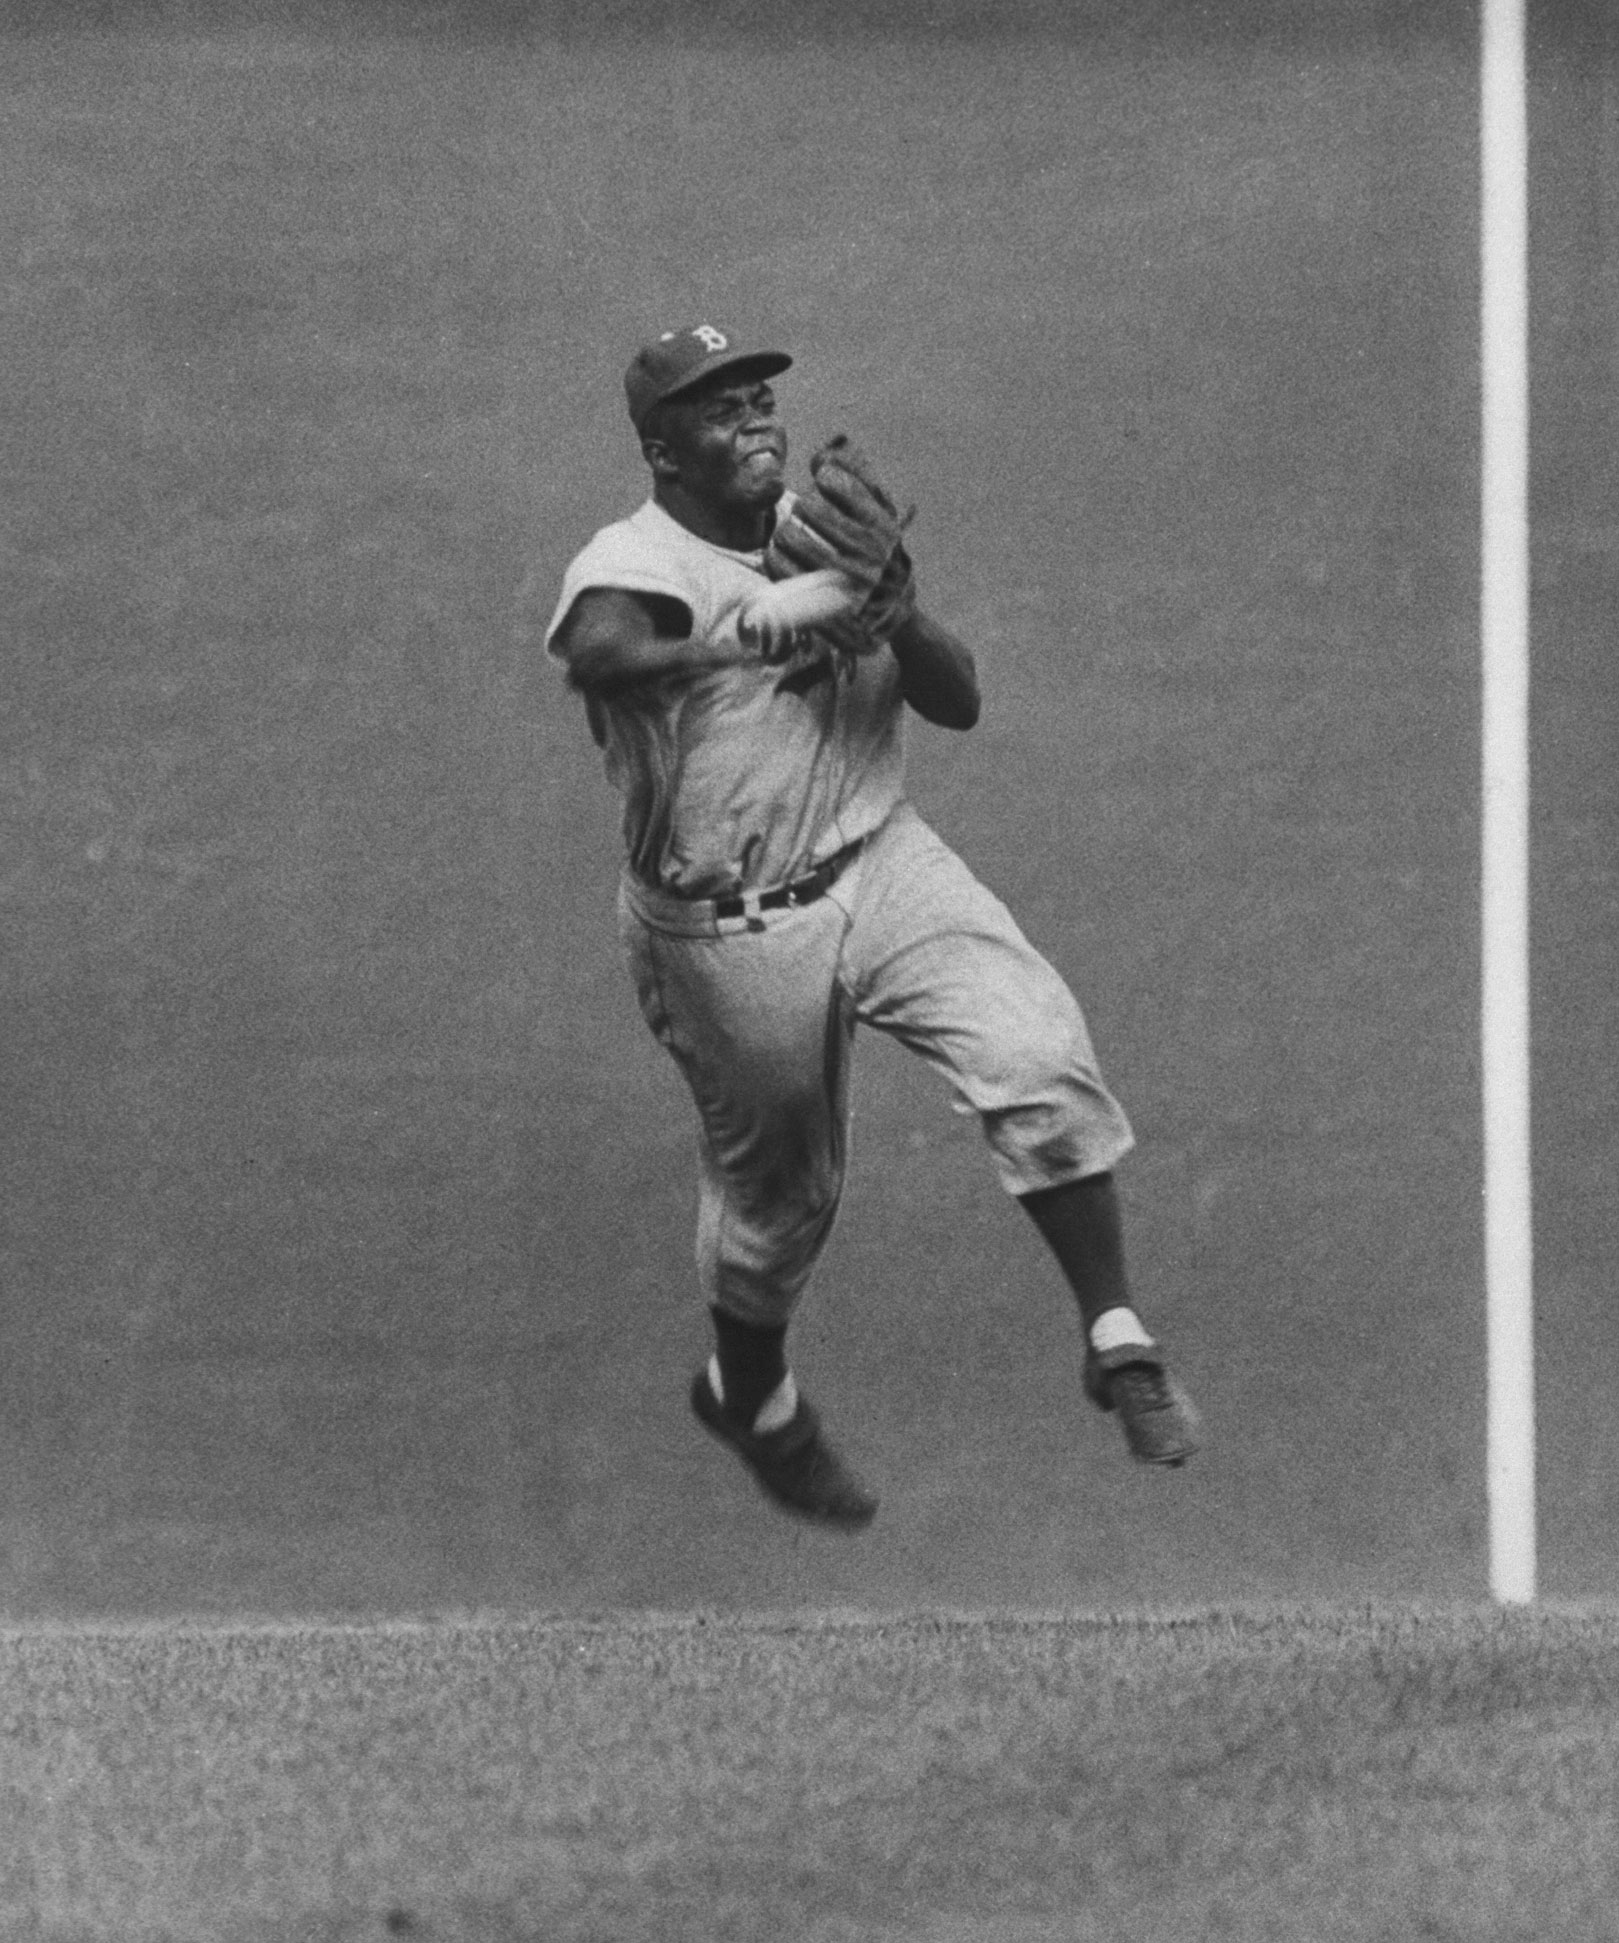 Jackie Robinson in action during game with the Giants, 1956